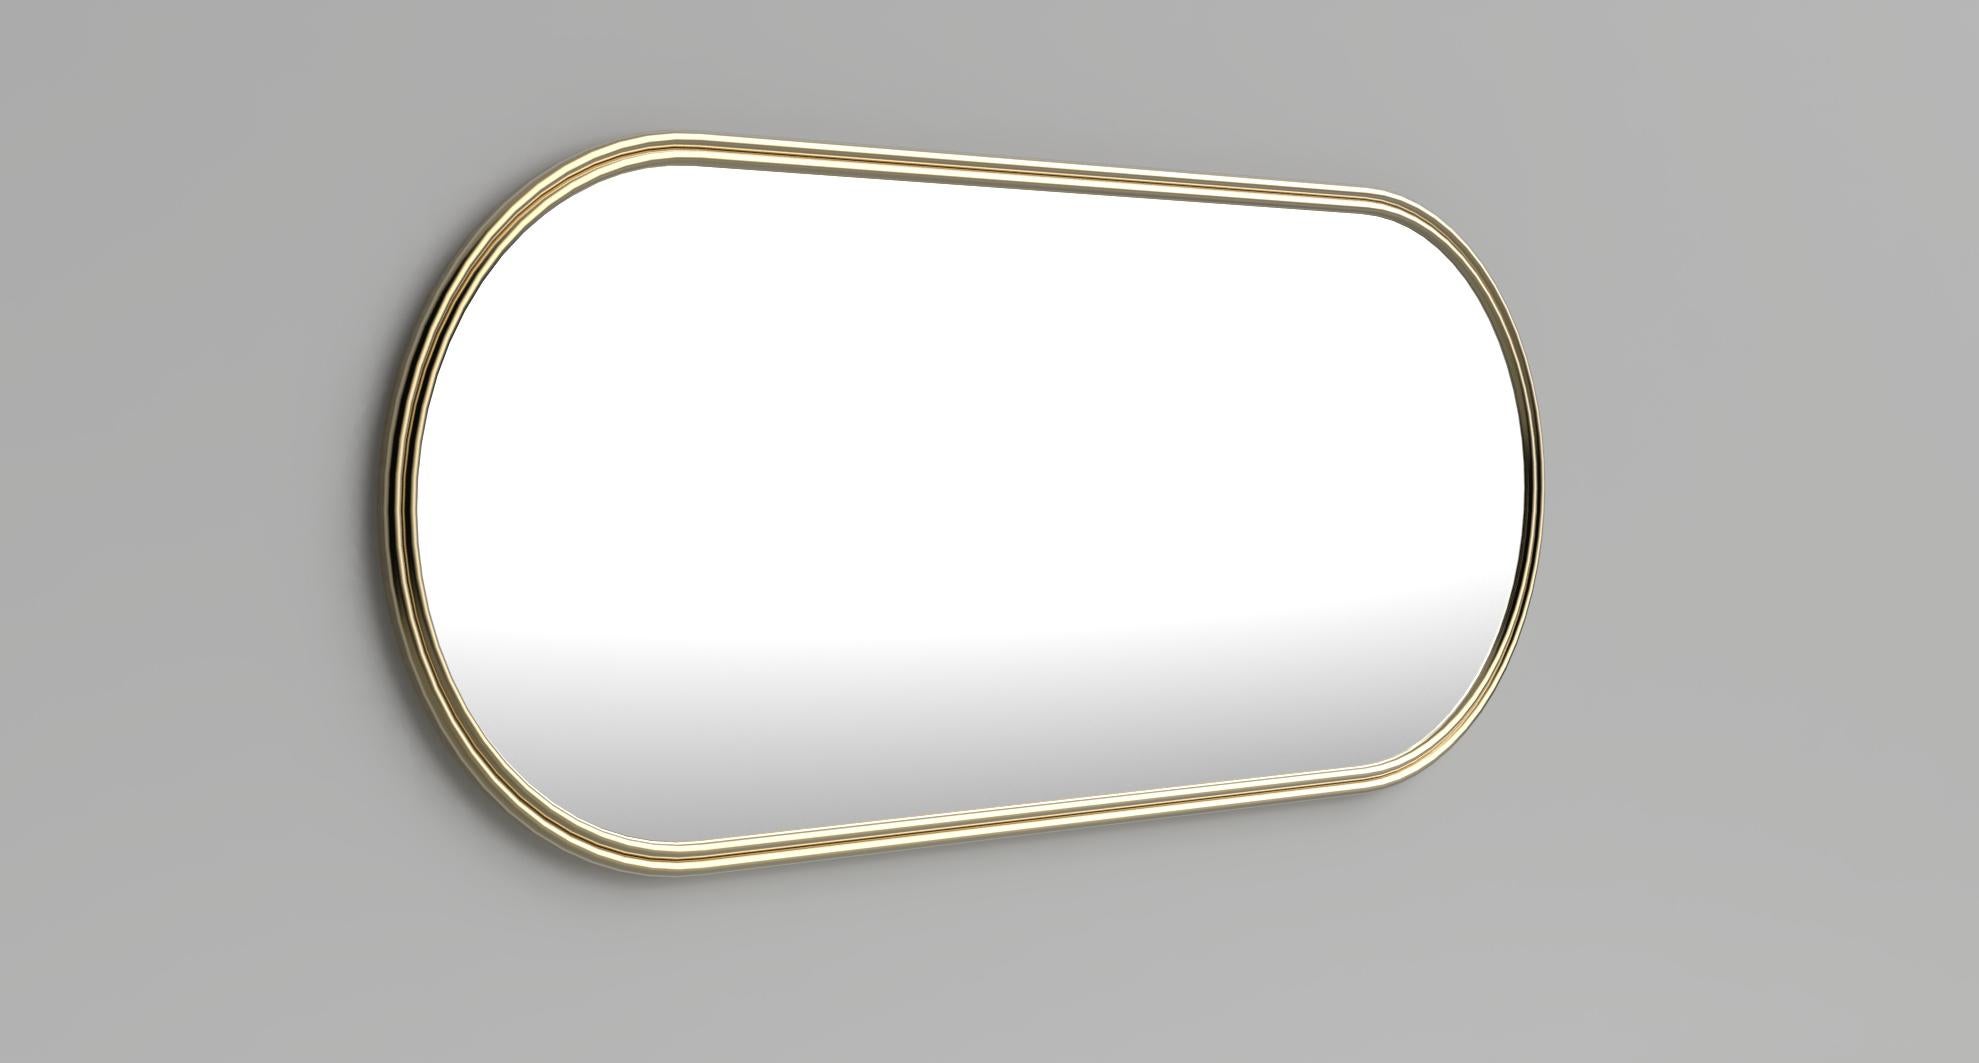 MIO Wall Mirror, Contemporary Collection, Handcrafted in Portugal - Europe by Greenapple.

The MIO modern wall mirror in brushed brass captivates the attention with each encounter. Meticulously crafted to be the focal point in contemporary